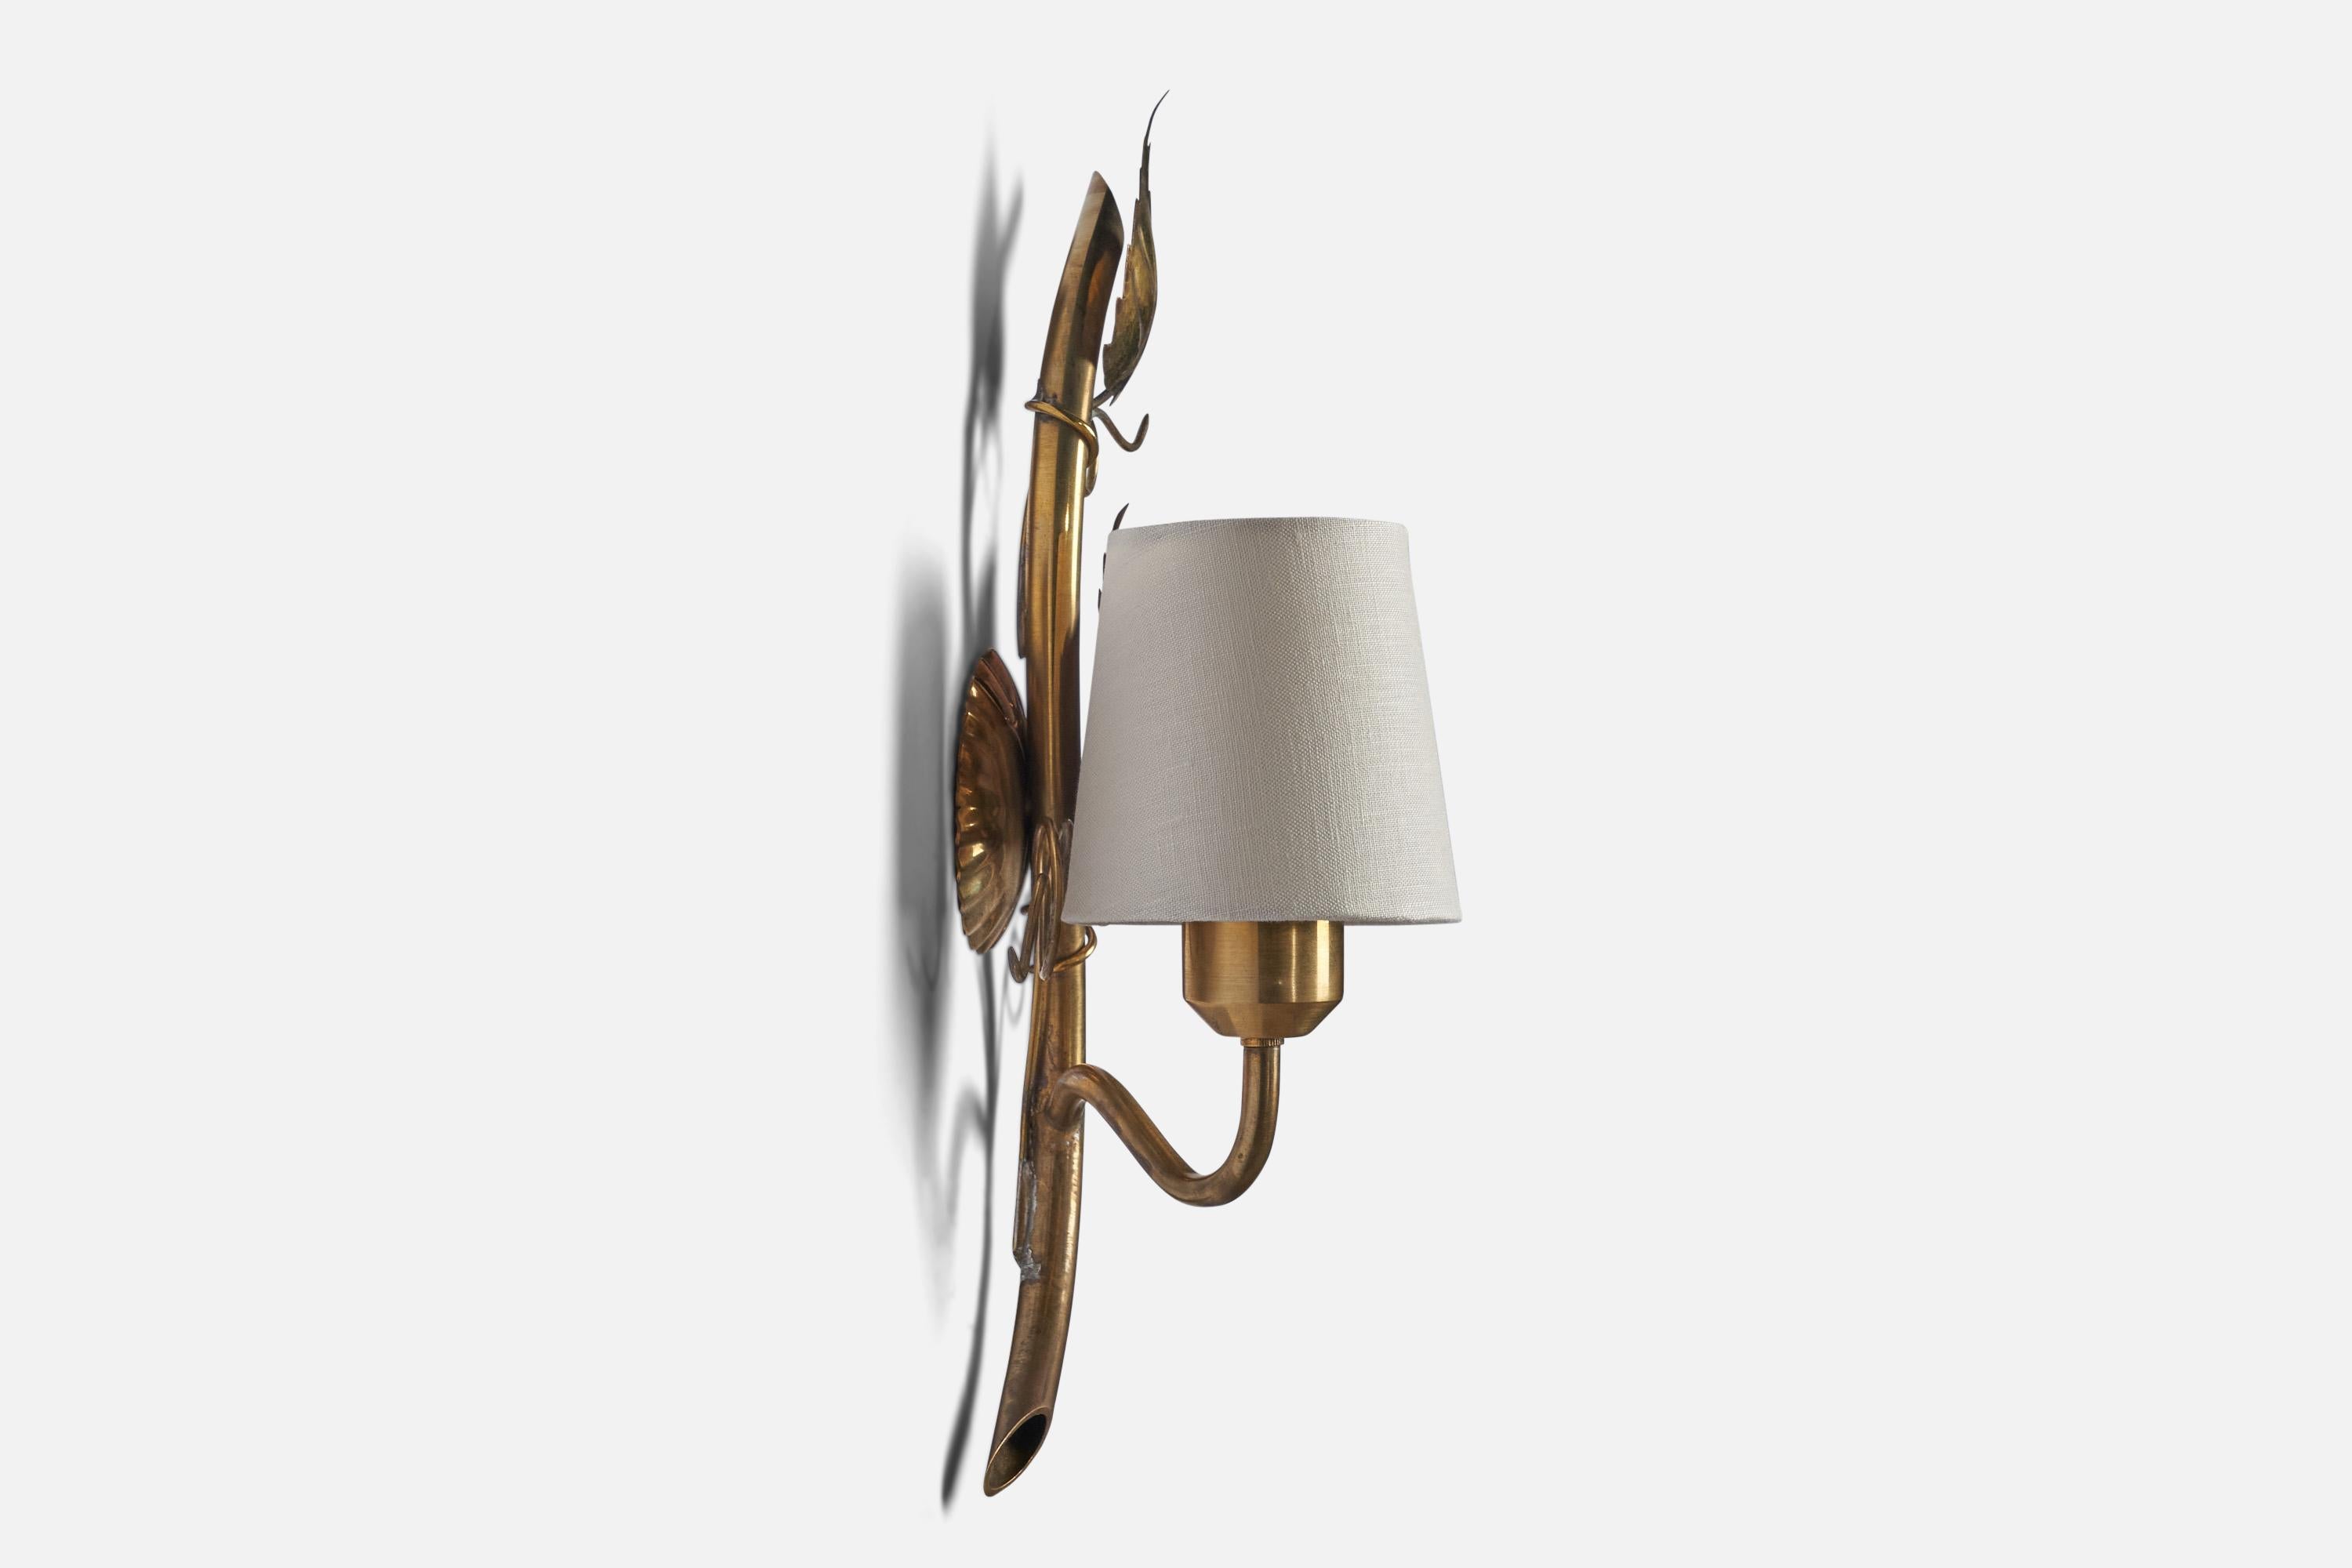 A brass and white fabric wall light designed and produced in Sweden, c. 1930s.

Overall Dimensions (inches): 23.5” H x 9” W x 27” D

Back Plate Dimensions (inches): 4” H x 1.55” W x 0.75” D

Bulb Specifications: E-26 Bulb

Number of Sockets: 1

All